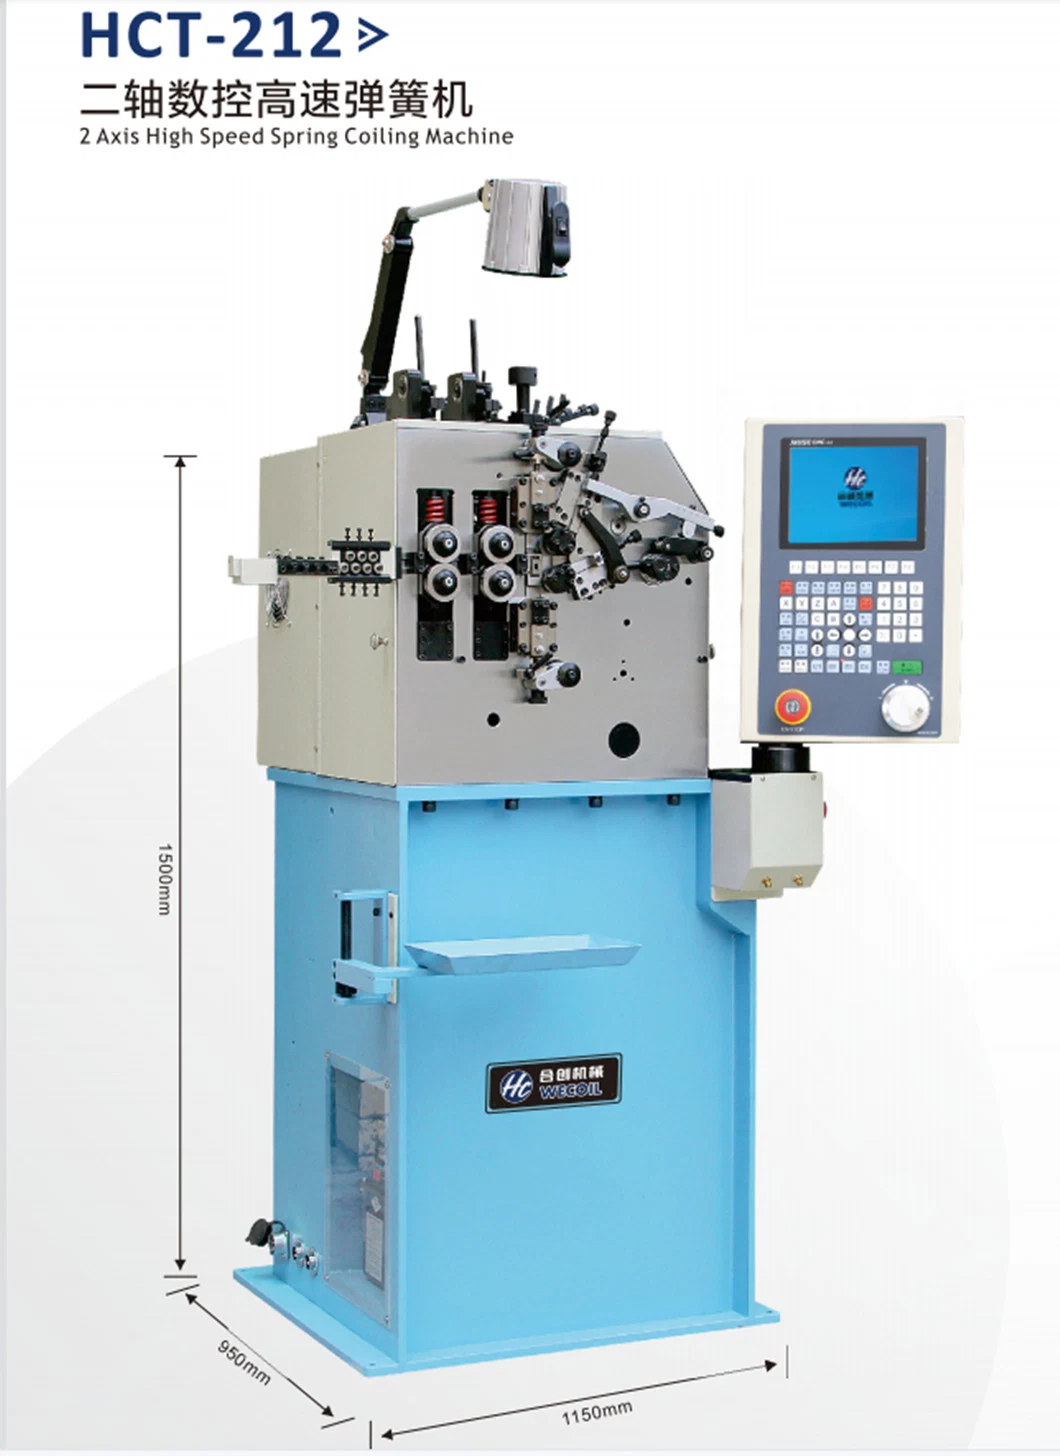 WECOIL HCT-212 0.3-1.2mm Spring Coiling Machine